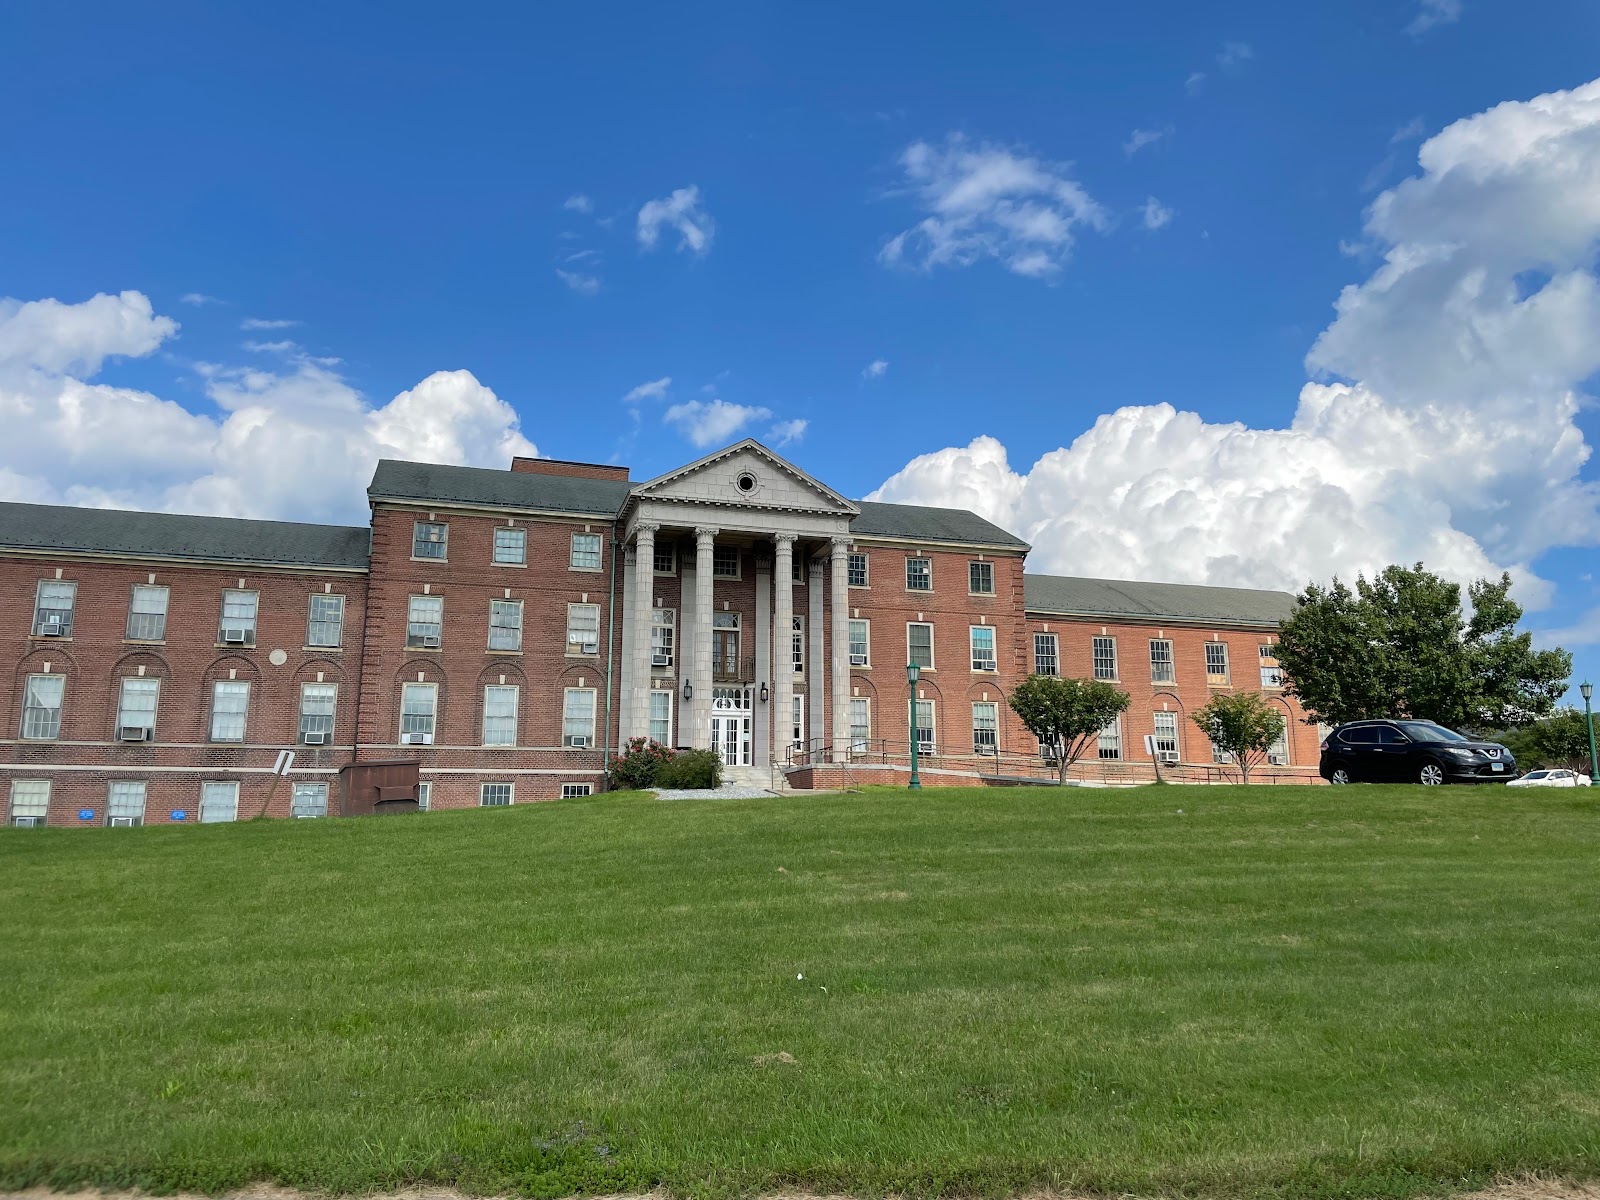 Connecticut Valley Hospital - Addiction Services Division